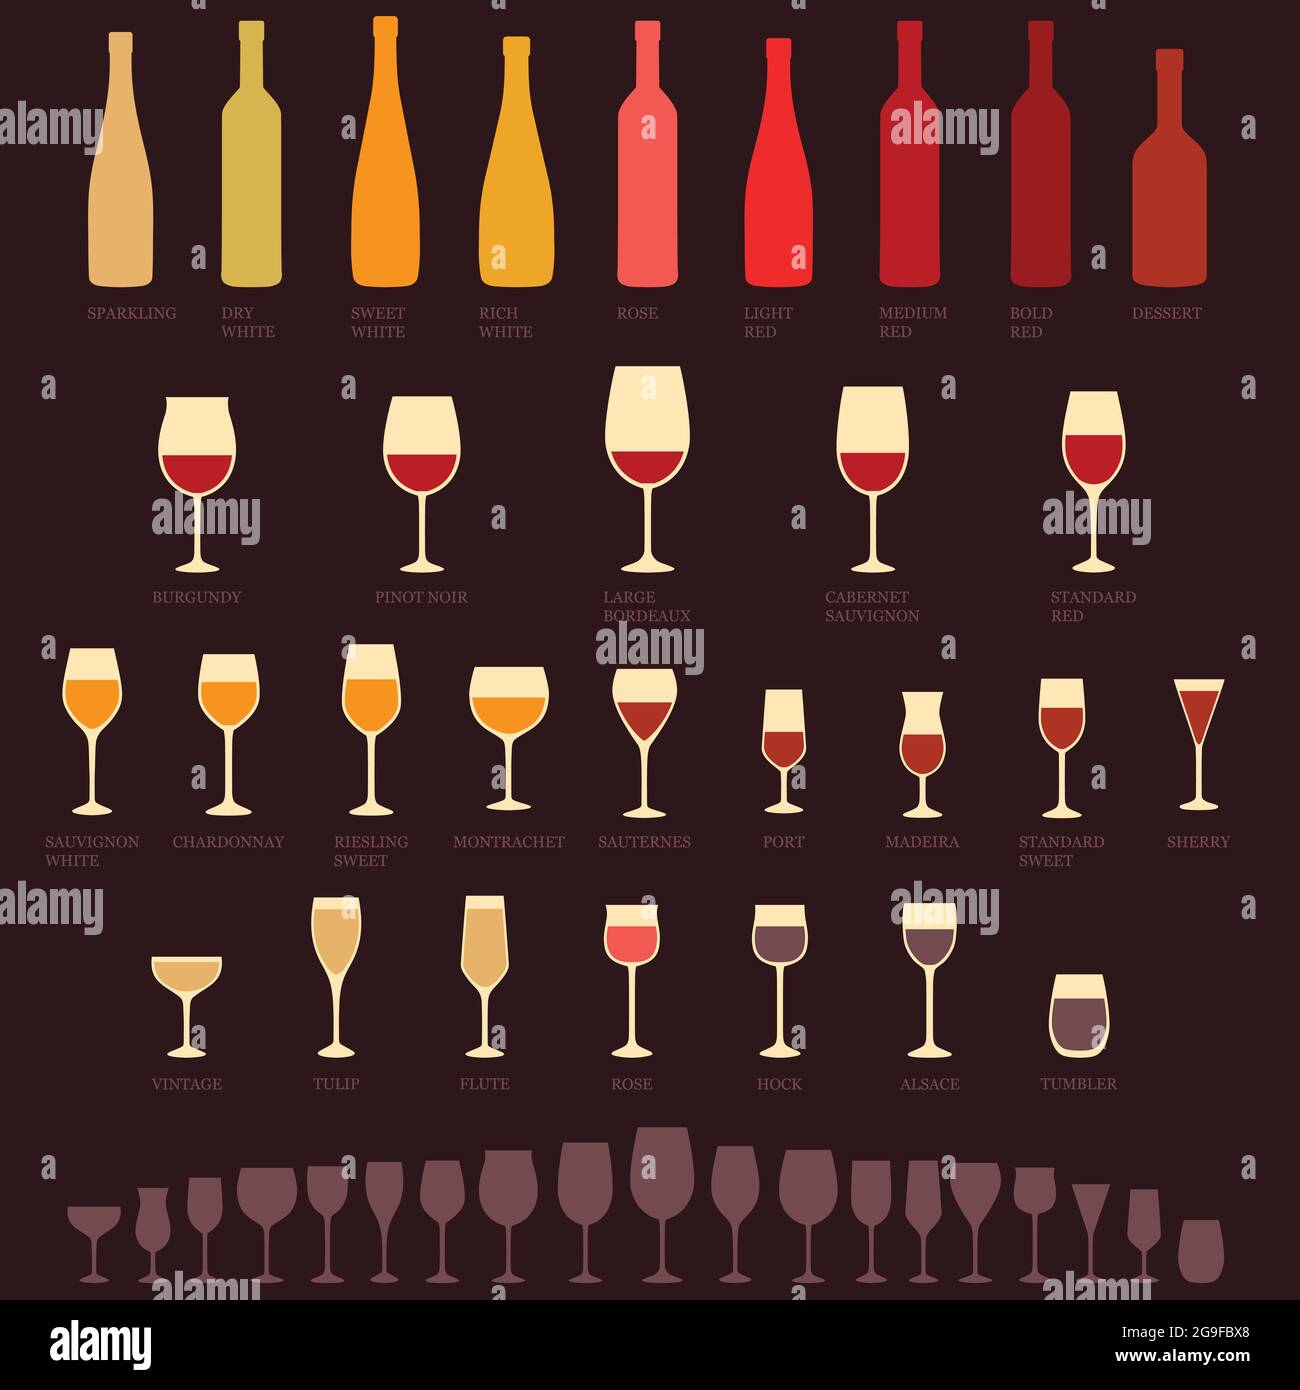 https://c8.alamy.com/comp/2G9FBX8/vector-red-and-white-wine-glasses-and-bottle-types-alcohol-drink-isolated-icons-2G9FBX8.jpg